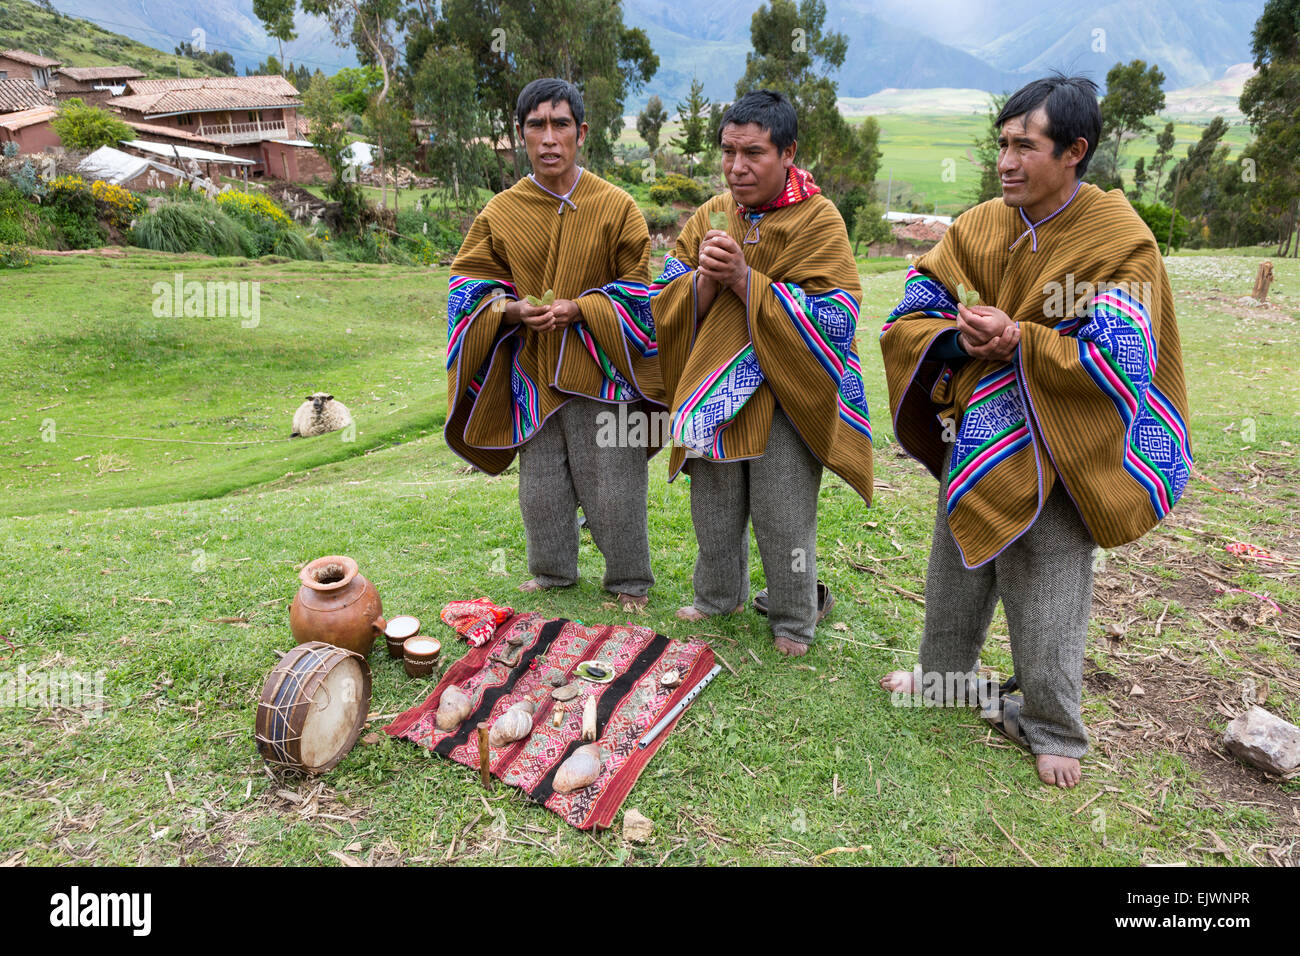 Peru, Urubamba Valley, Quechua Village of Misminay.  Village Men Performing a Welcoming Ceremony with Coca Leaves for Guests. Stock Photo